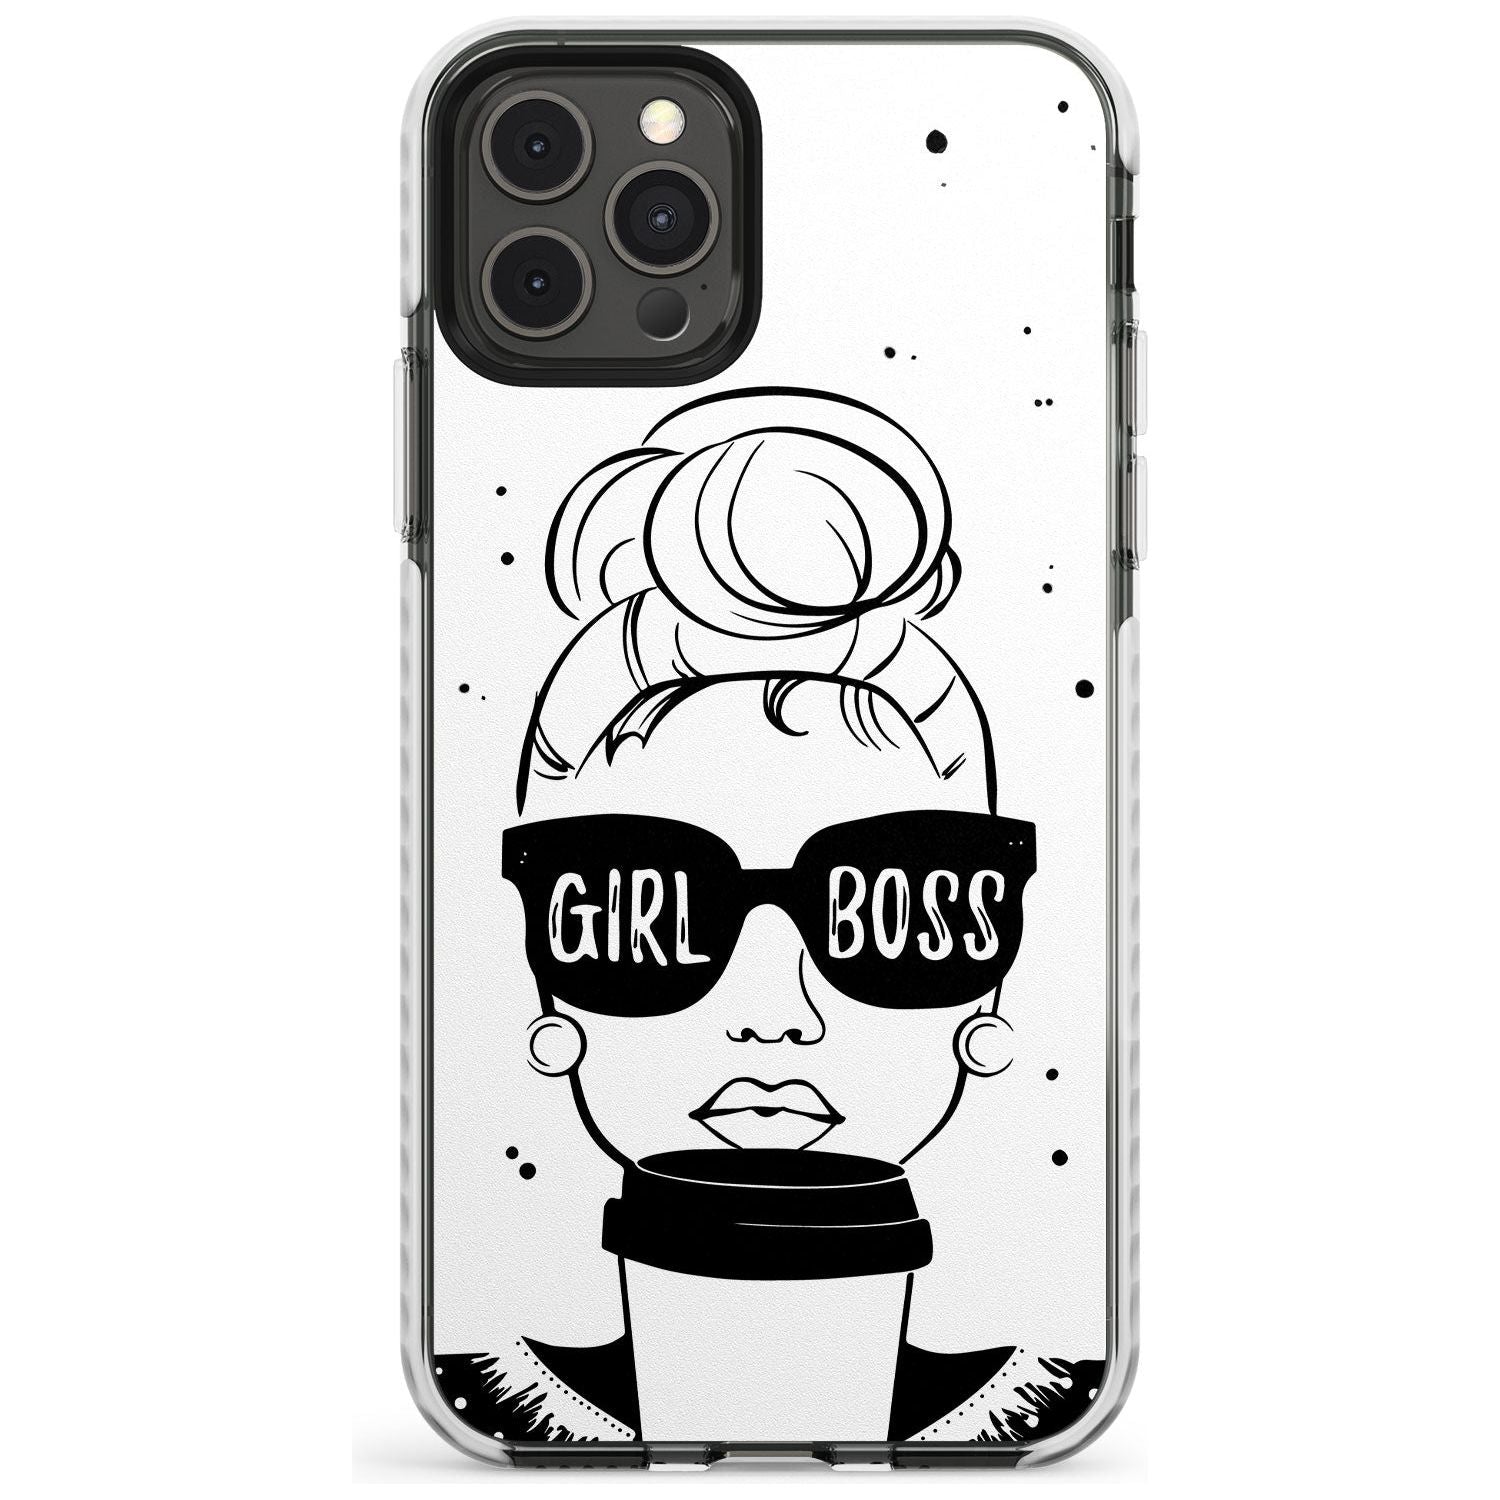 Girl Boss Impact Phone Case for iPhone 11 Pro Max